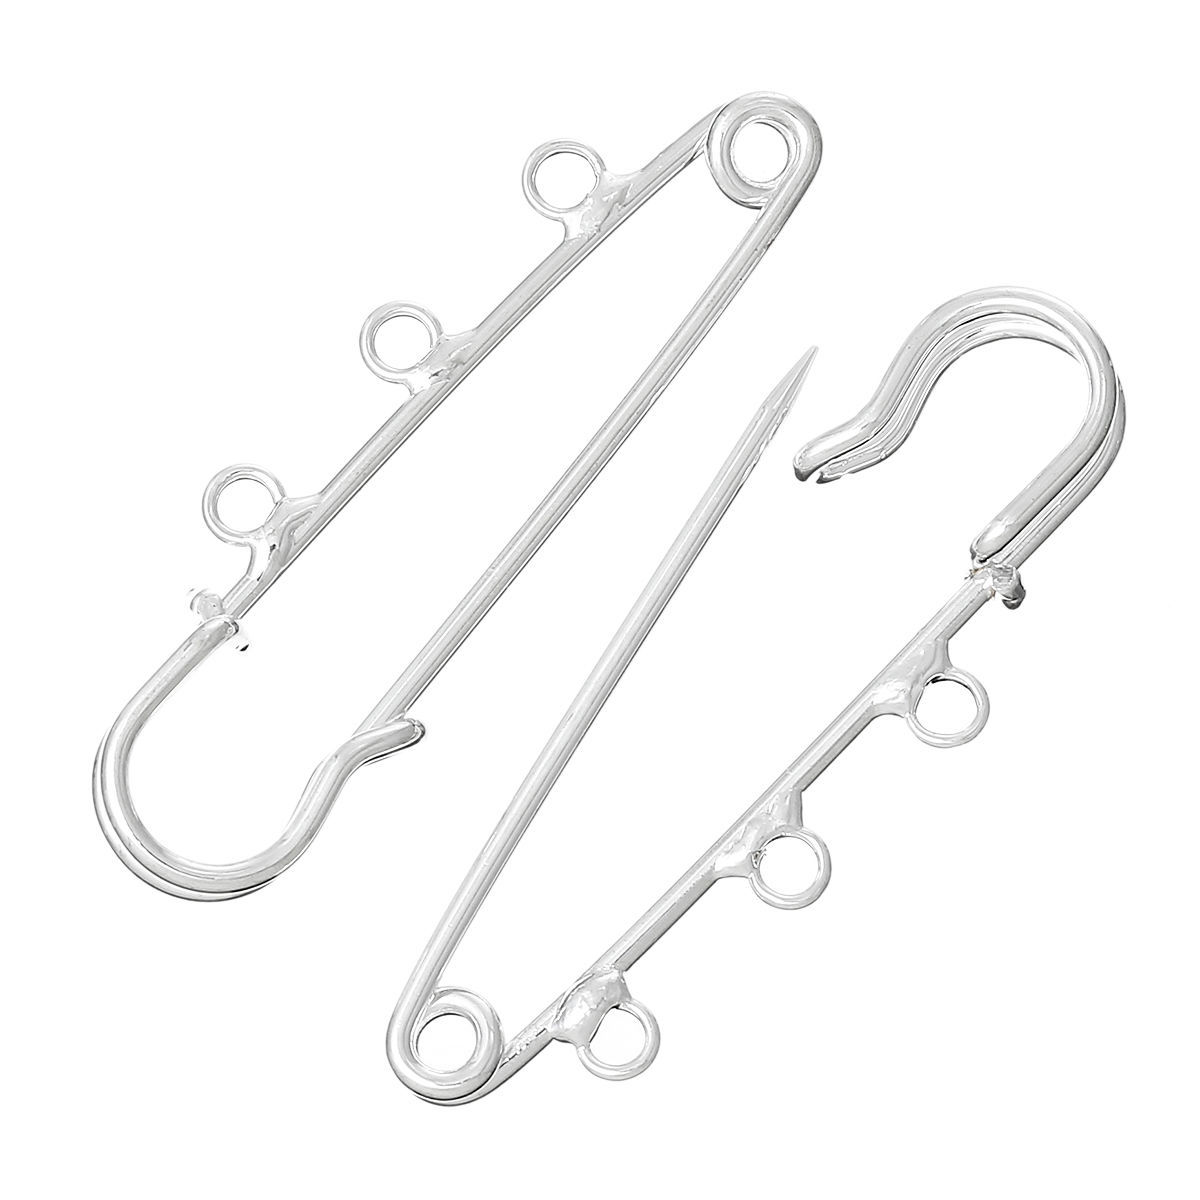 Picture of Iron Based Alloy Safety Pin Brooches Connectors Findings Silver Plated 3 Loops 5cm x 1.6cm(2" x 5/8"), 20 PCs